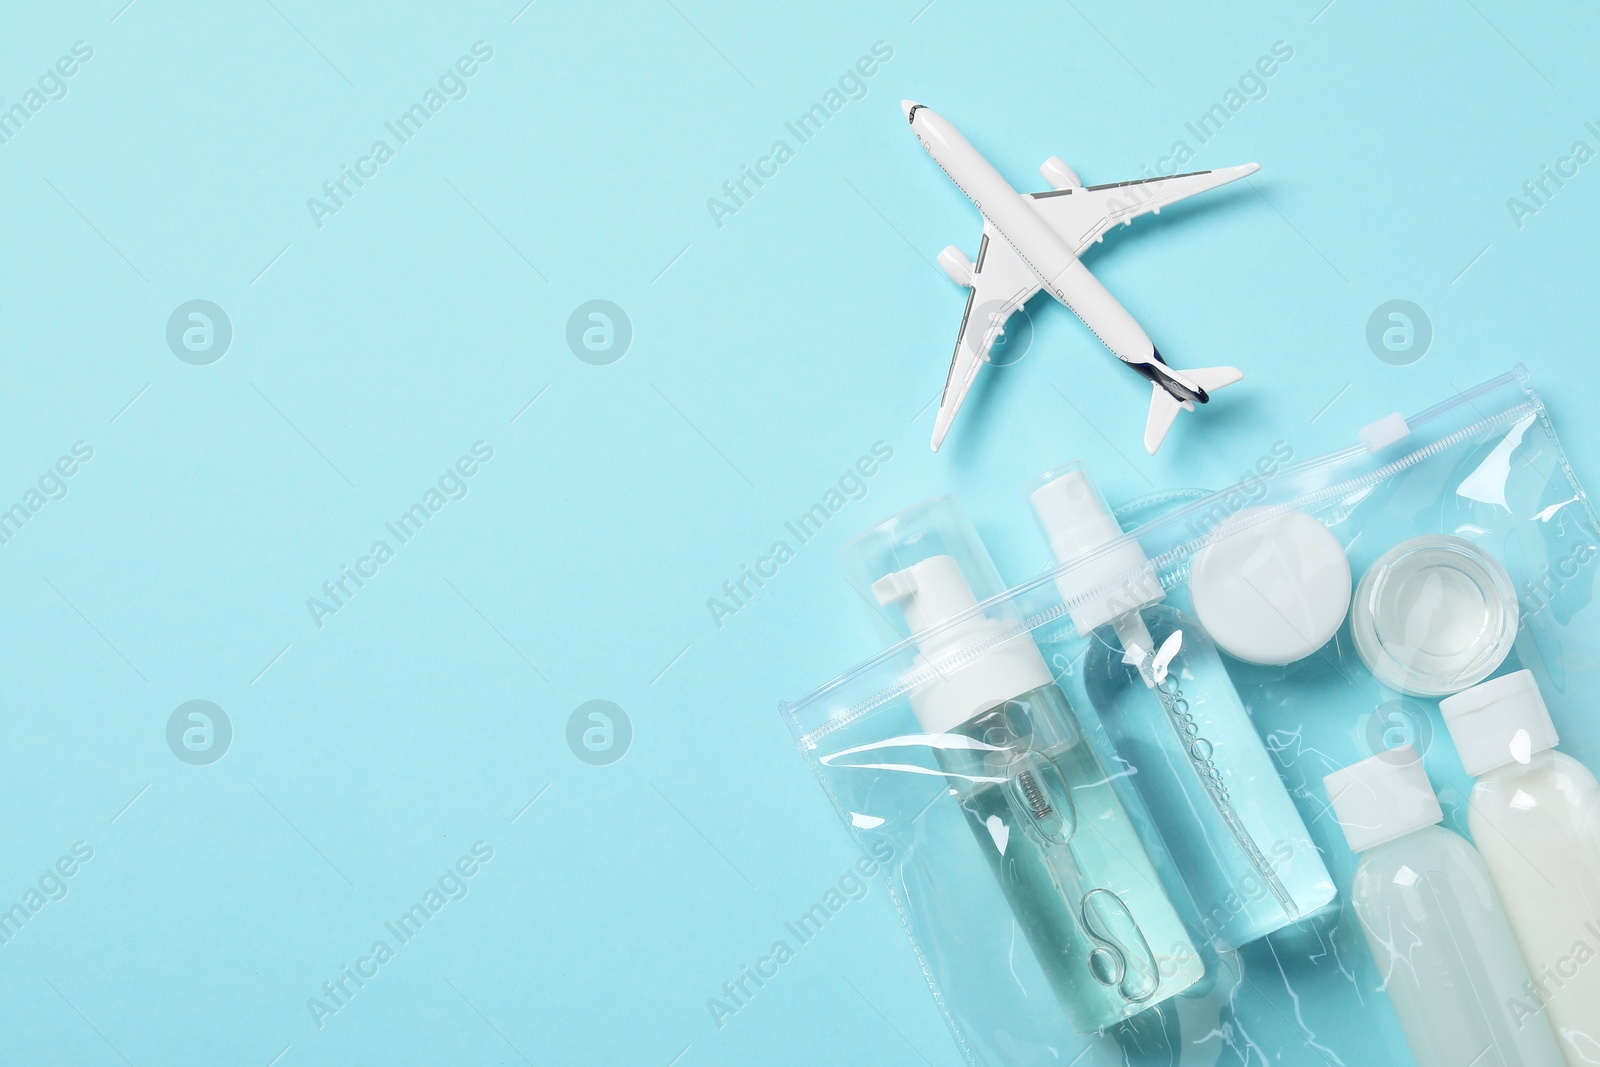 Photo of Cosmetic travel kit in plastic bag and toy plane on light blue background, top view with space for text. Bath accessories